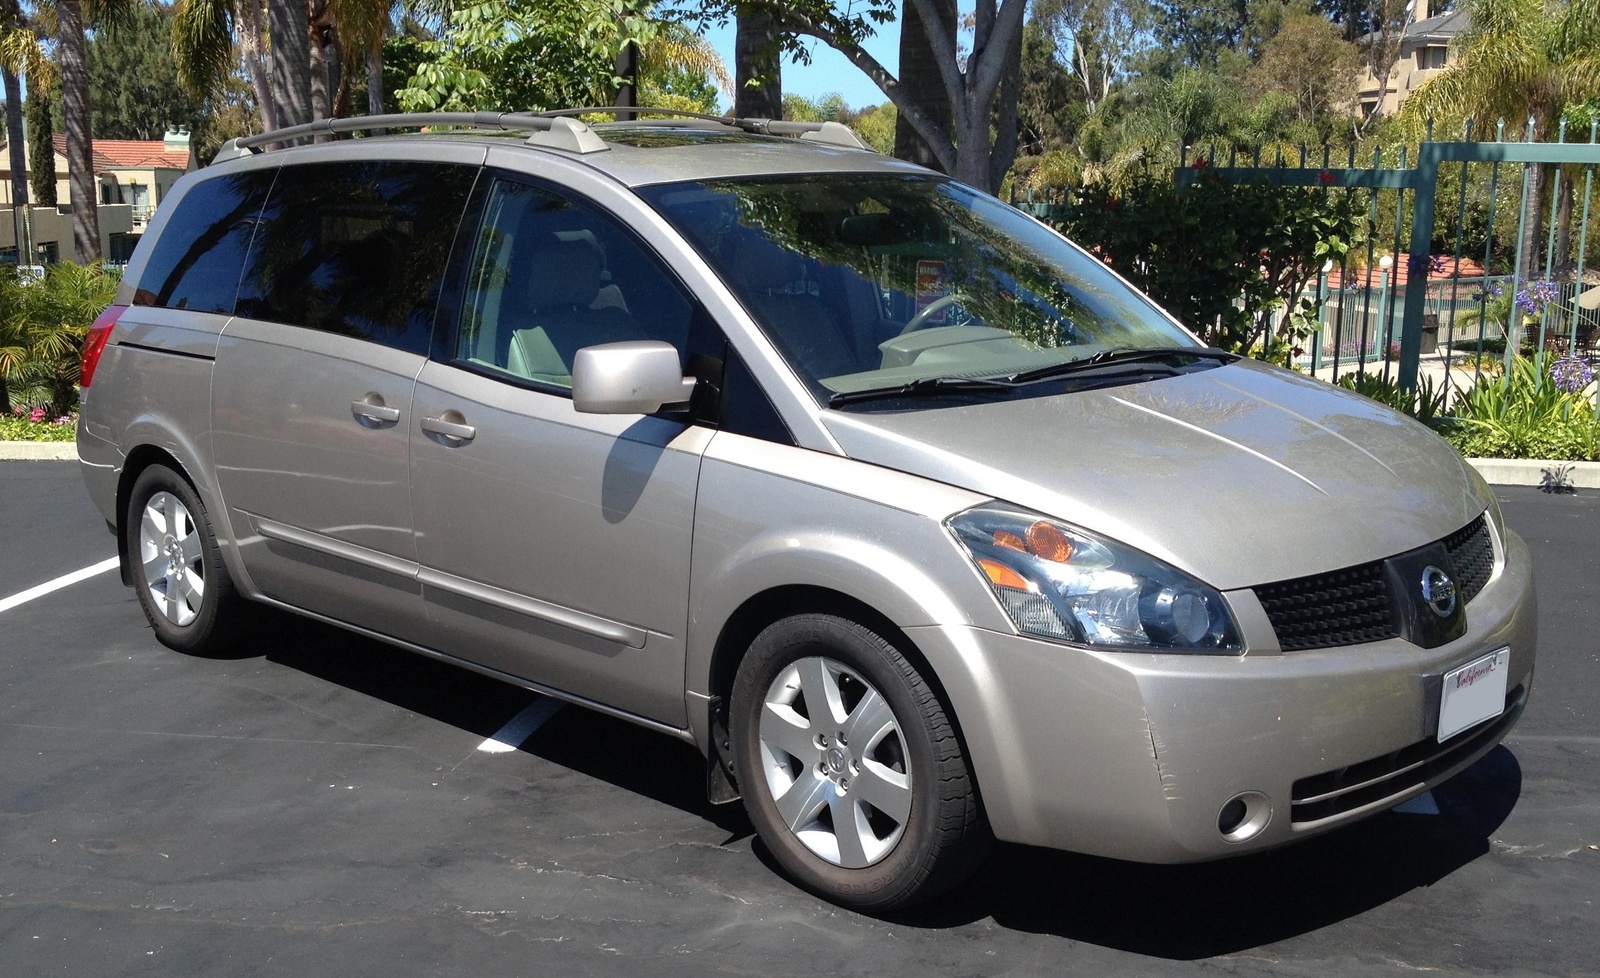 Picture of nissan quest 2005 #2